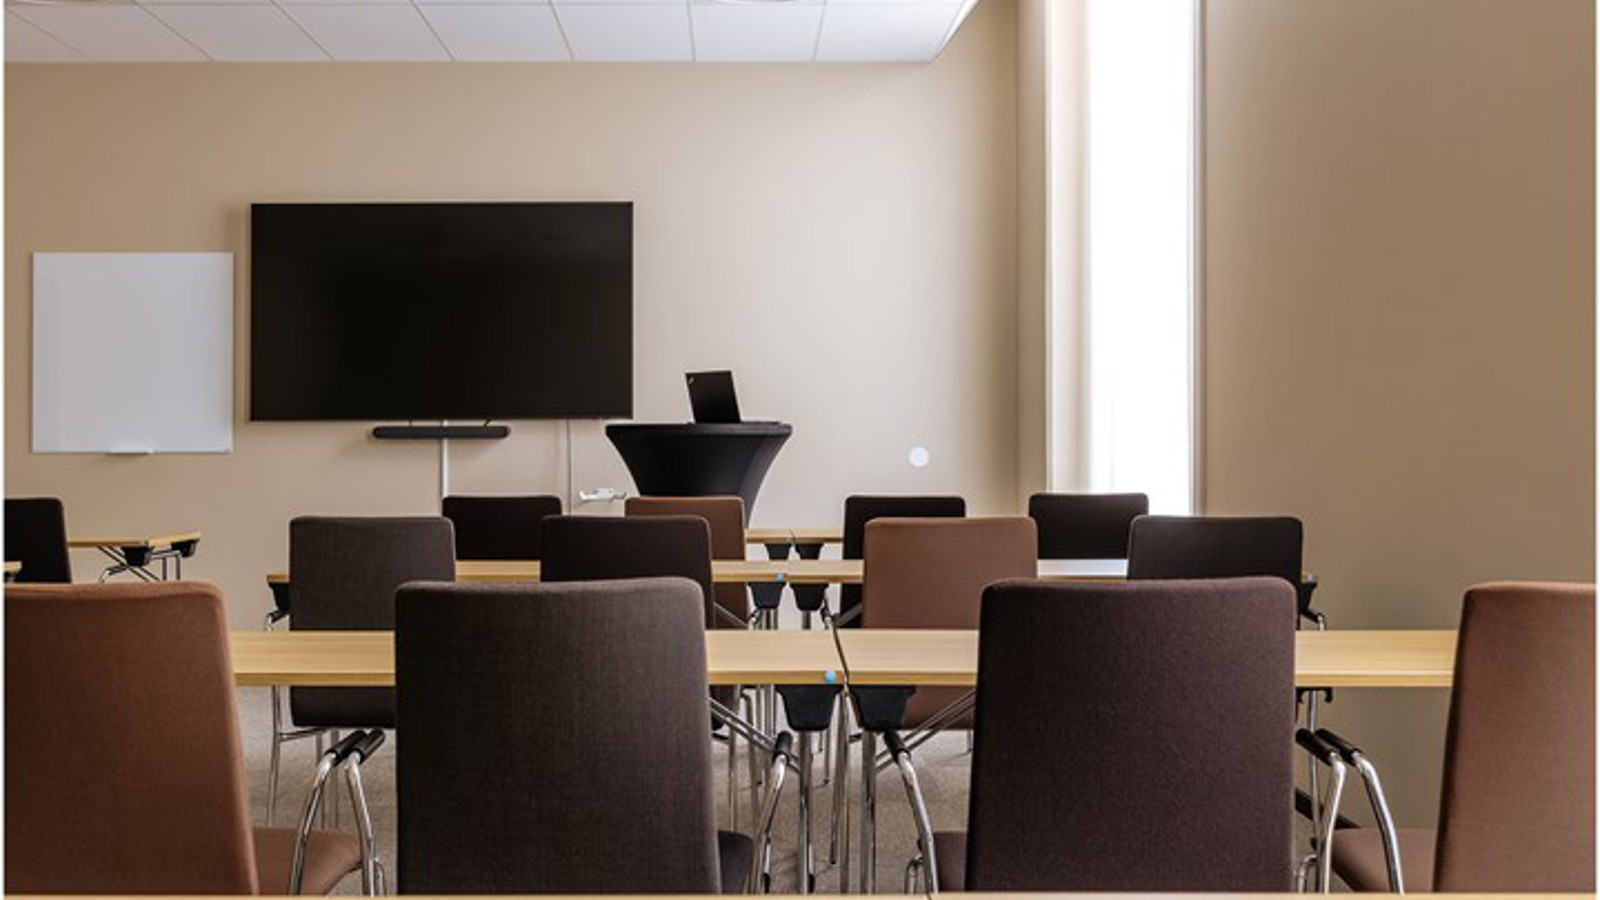 Conference room with school seating in light and dark brown colors with TV screen and window